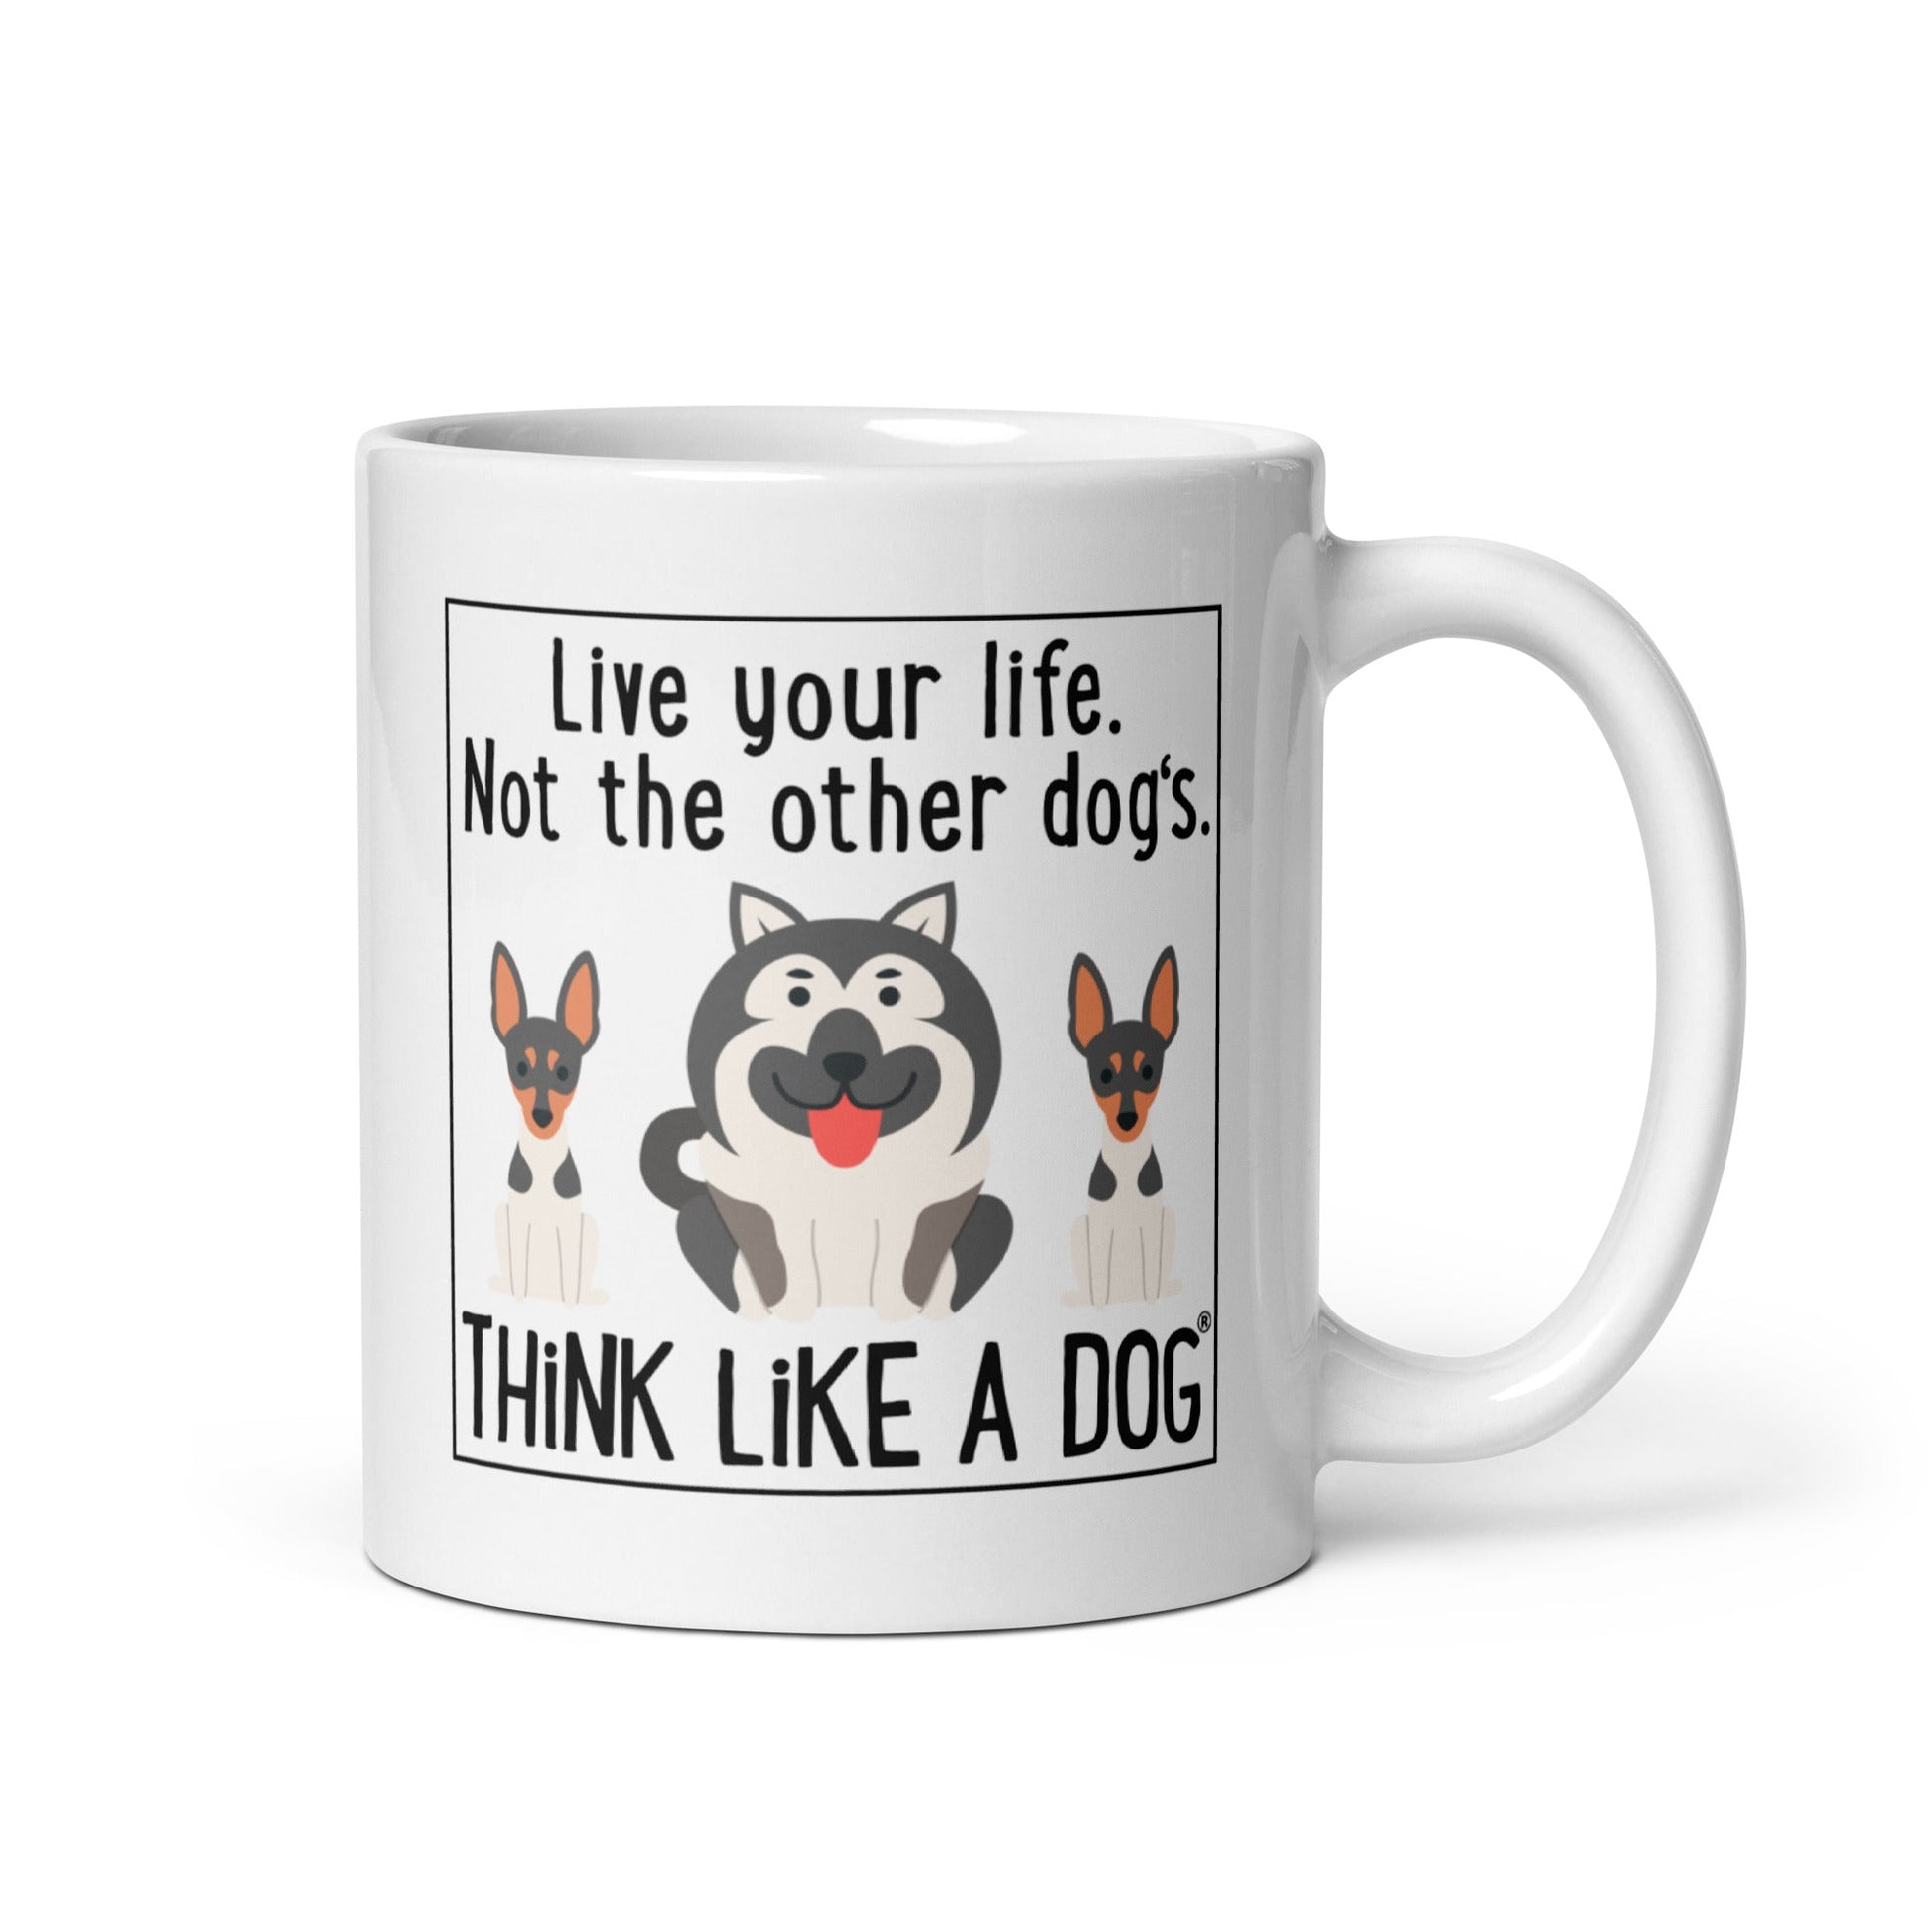 THiNK LiKE A DOG® White glossy Mug "live your life. not the other dog's." featuring images of three cartoon dogs, two resembling German Shepherds and one a gray Hus